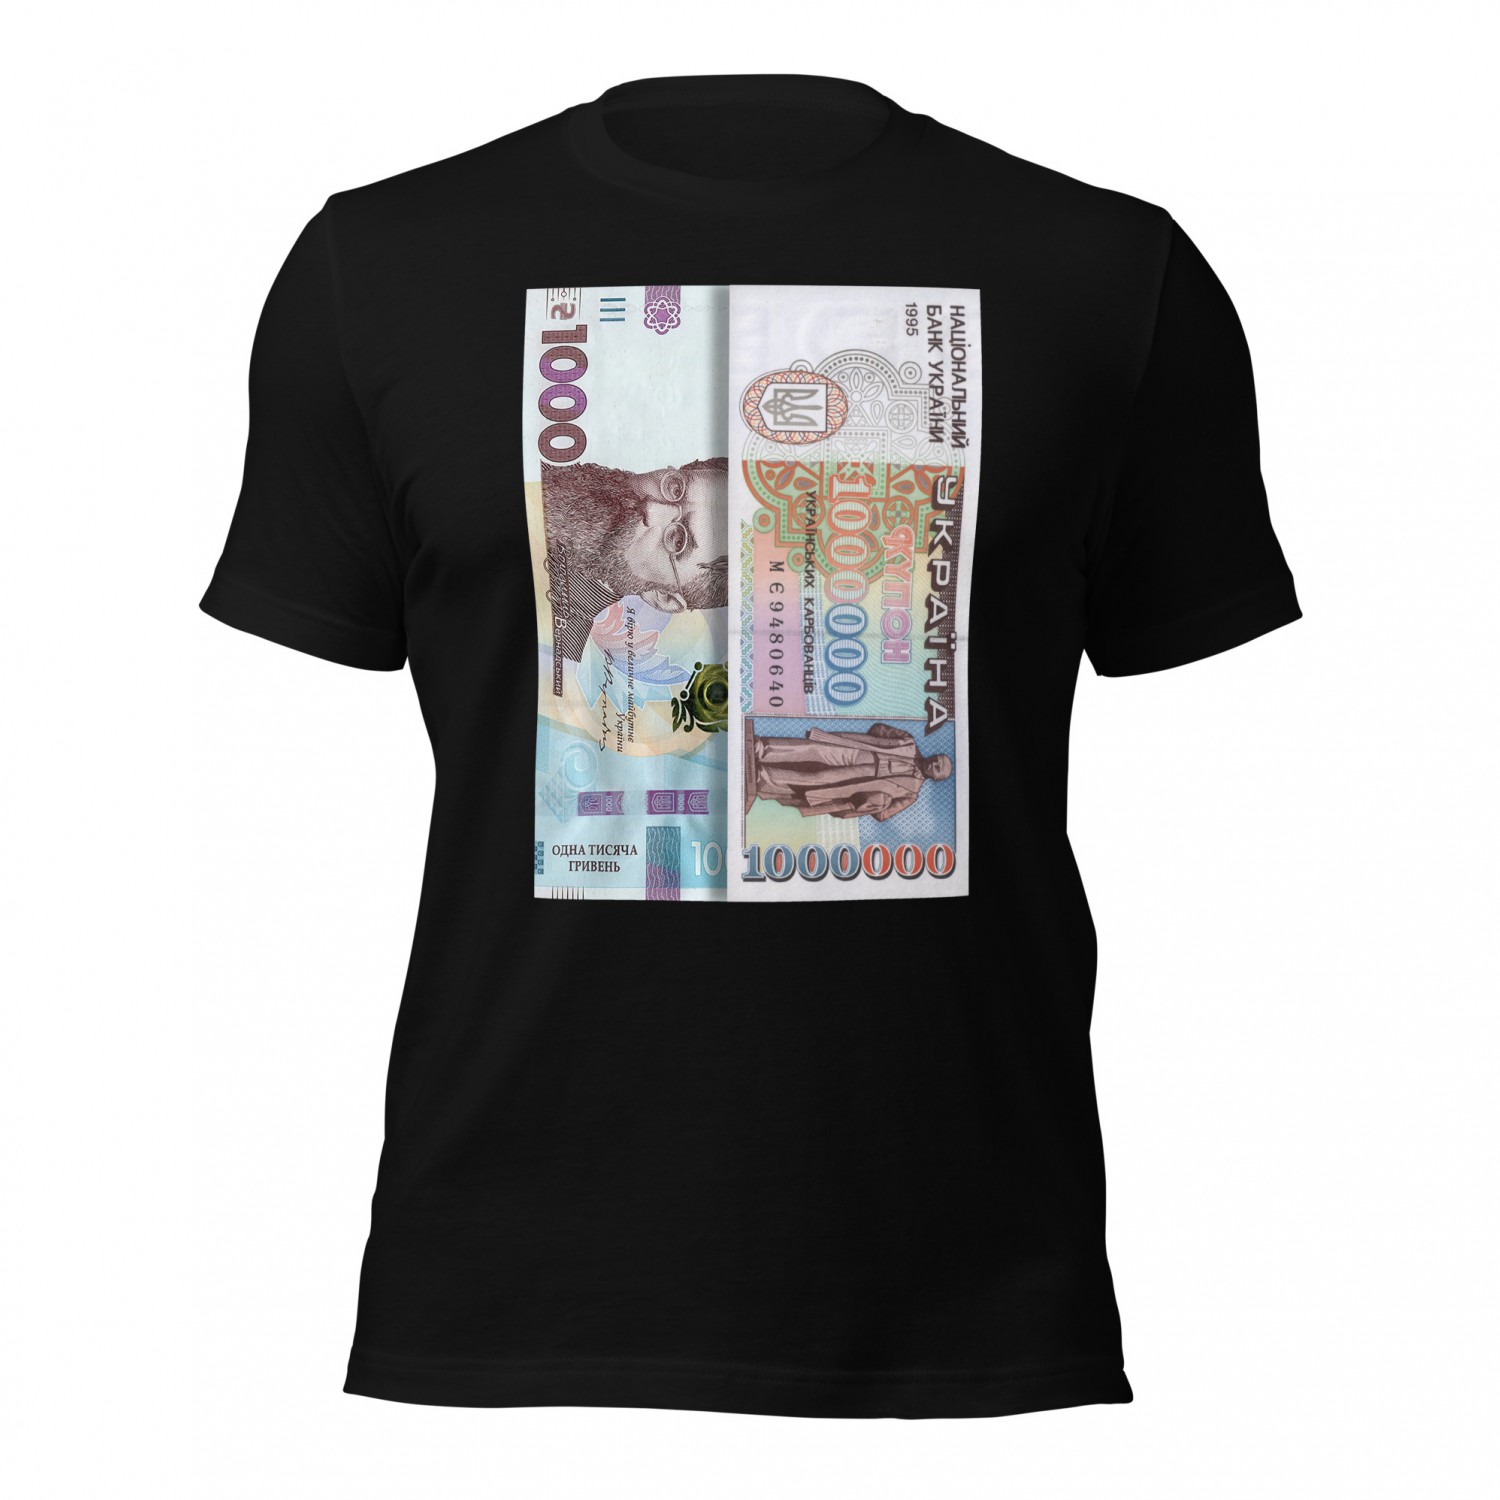 Buy a Karbovanets T-shirt